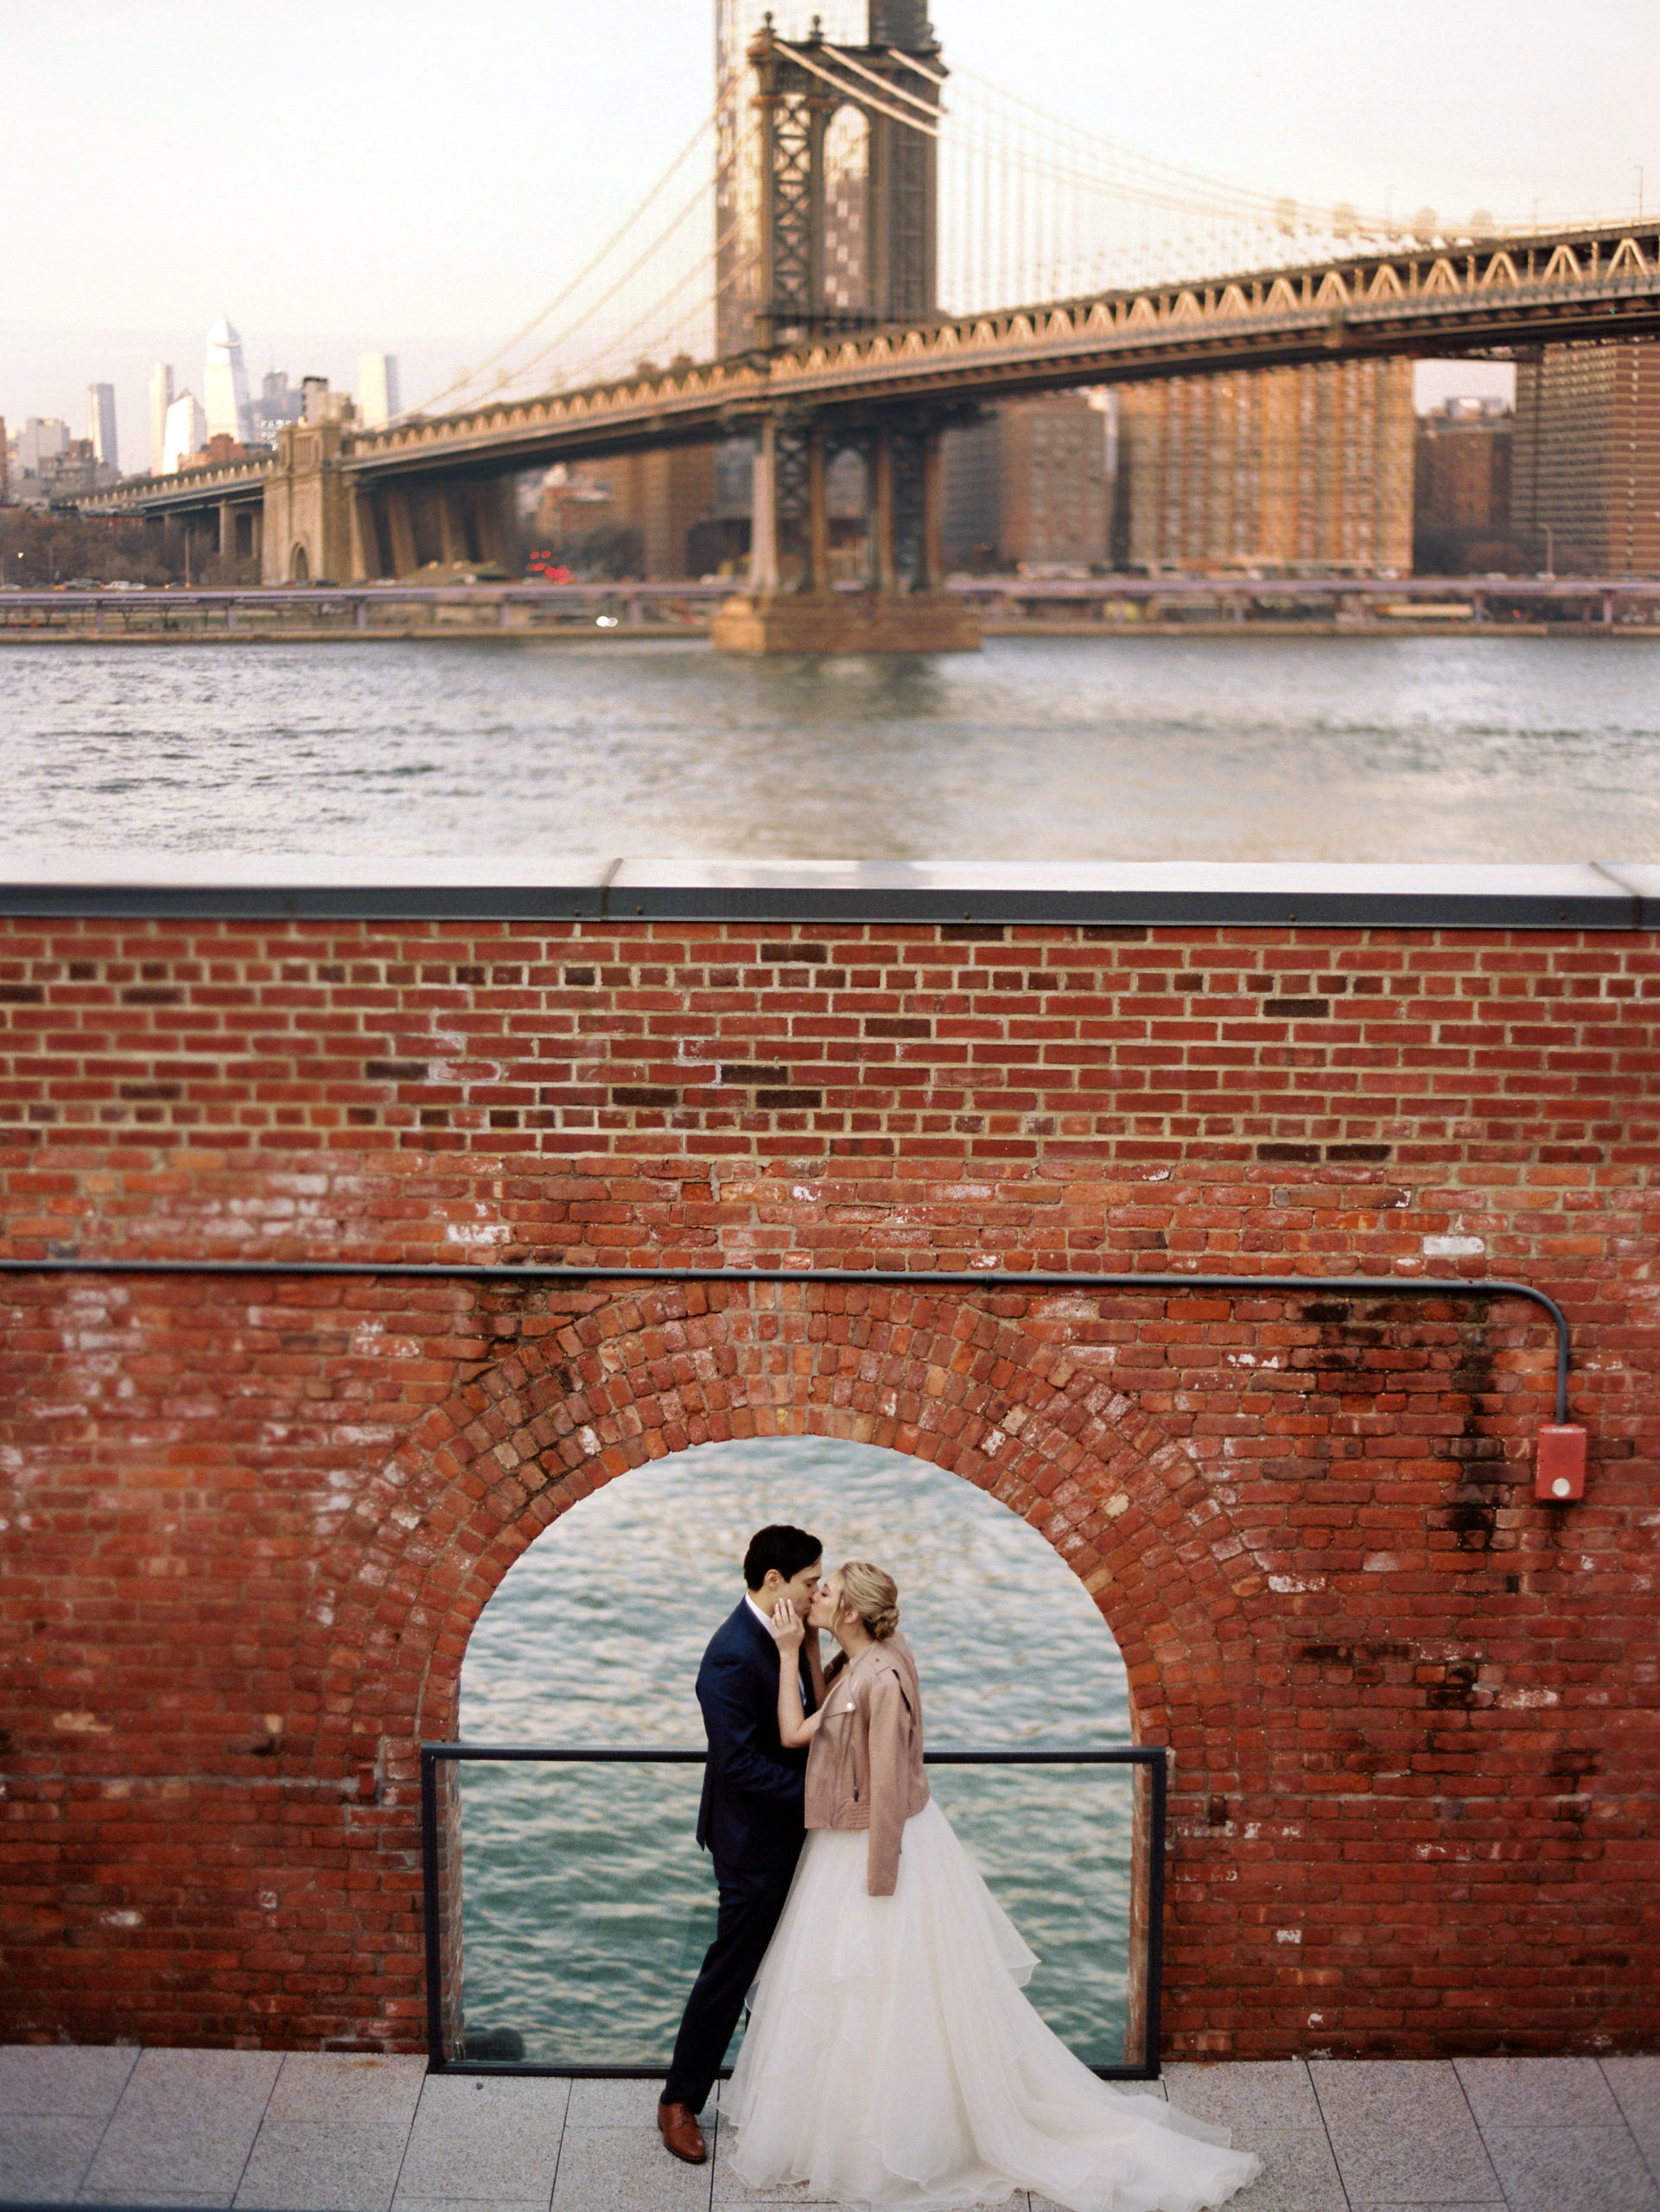 Brooklyn, NY Elopement Wedding at Brooklyn Bridge Park and River Cafe in NYC by Wedding Photographer Jessica Manns Photography